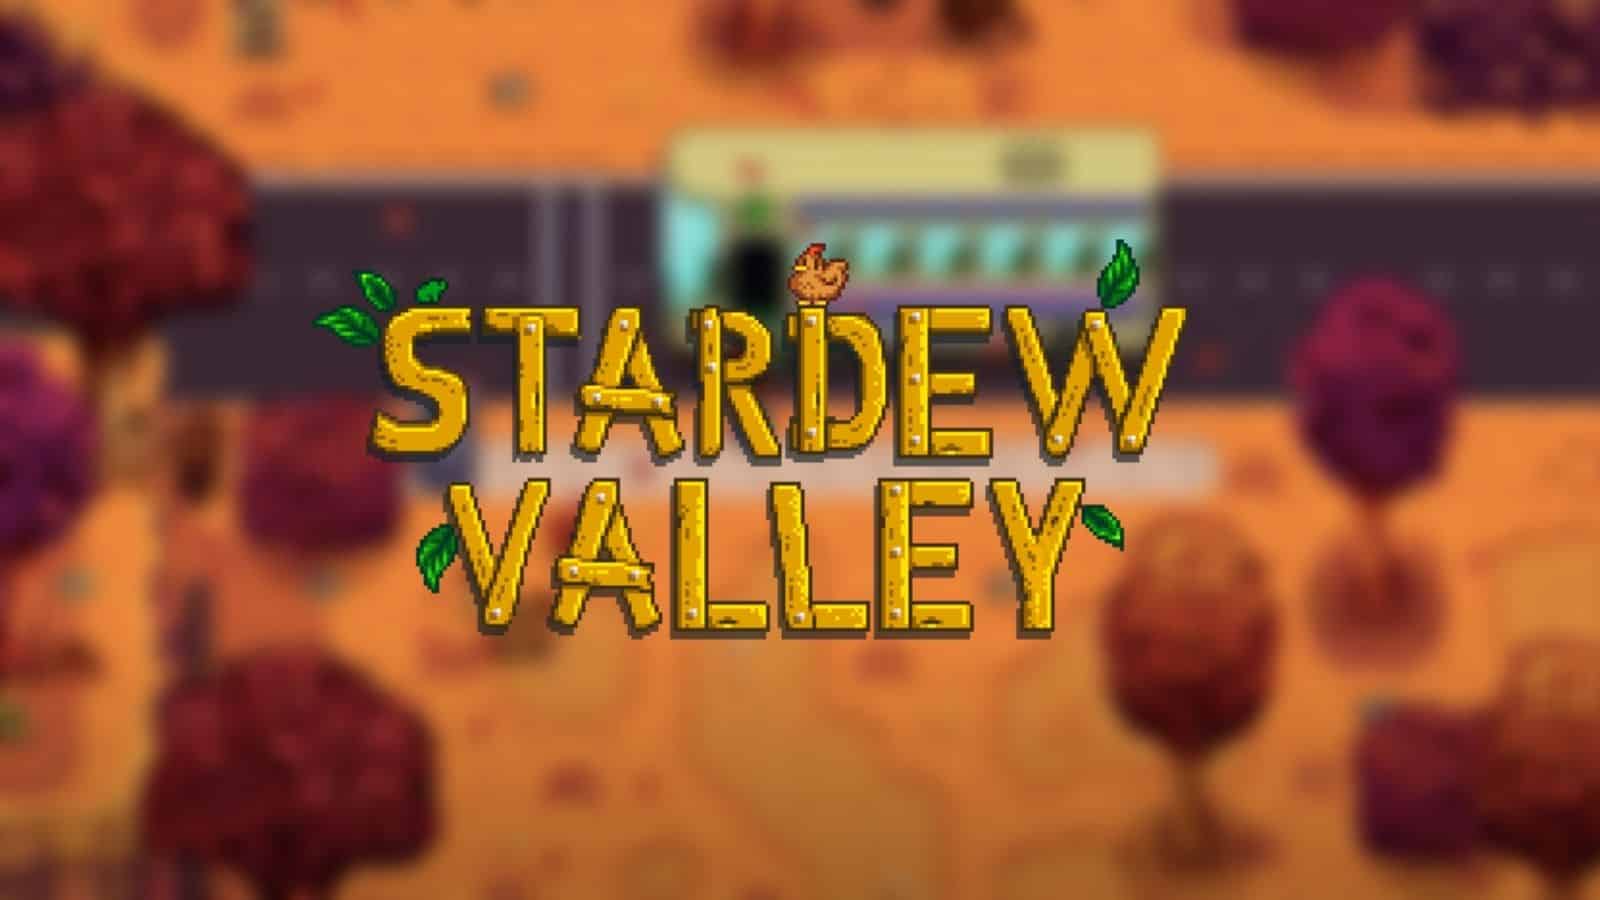 stardew valley logo fall setting background